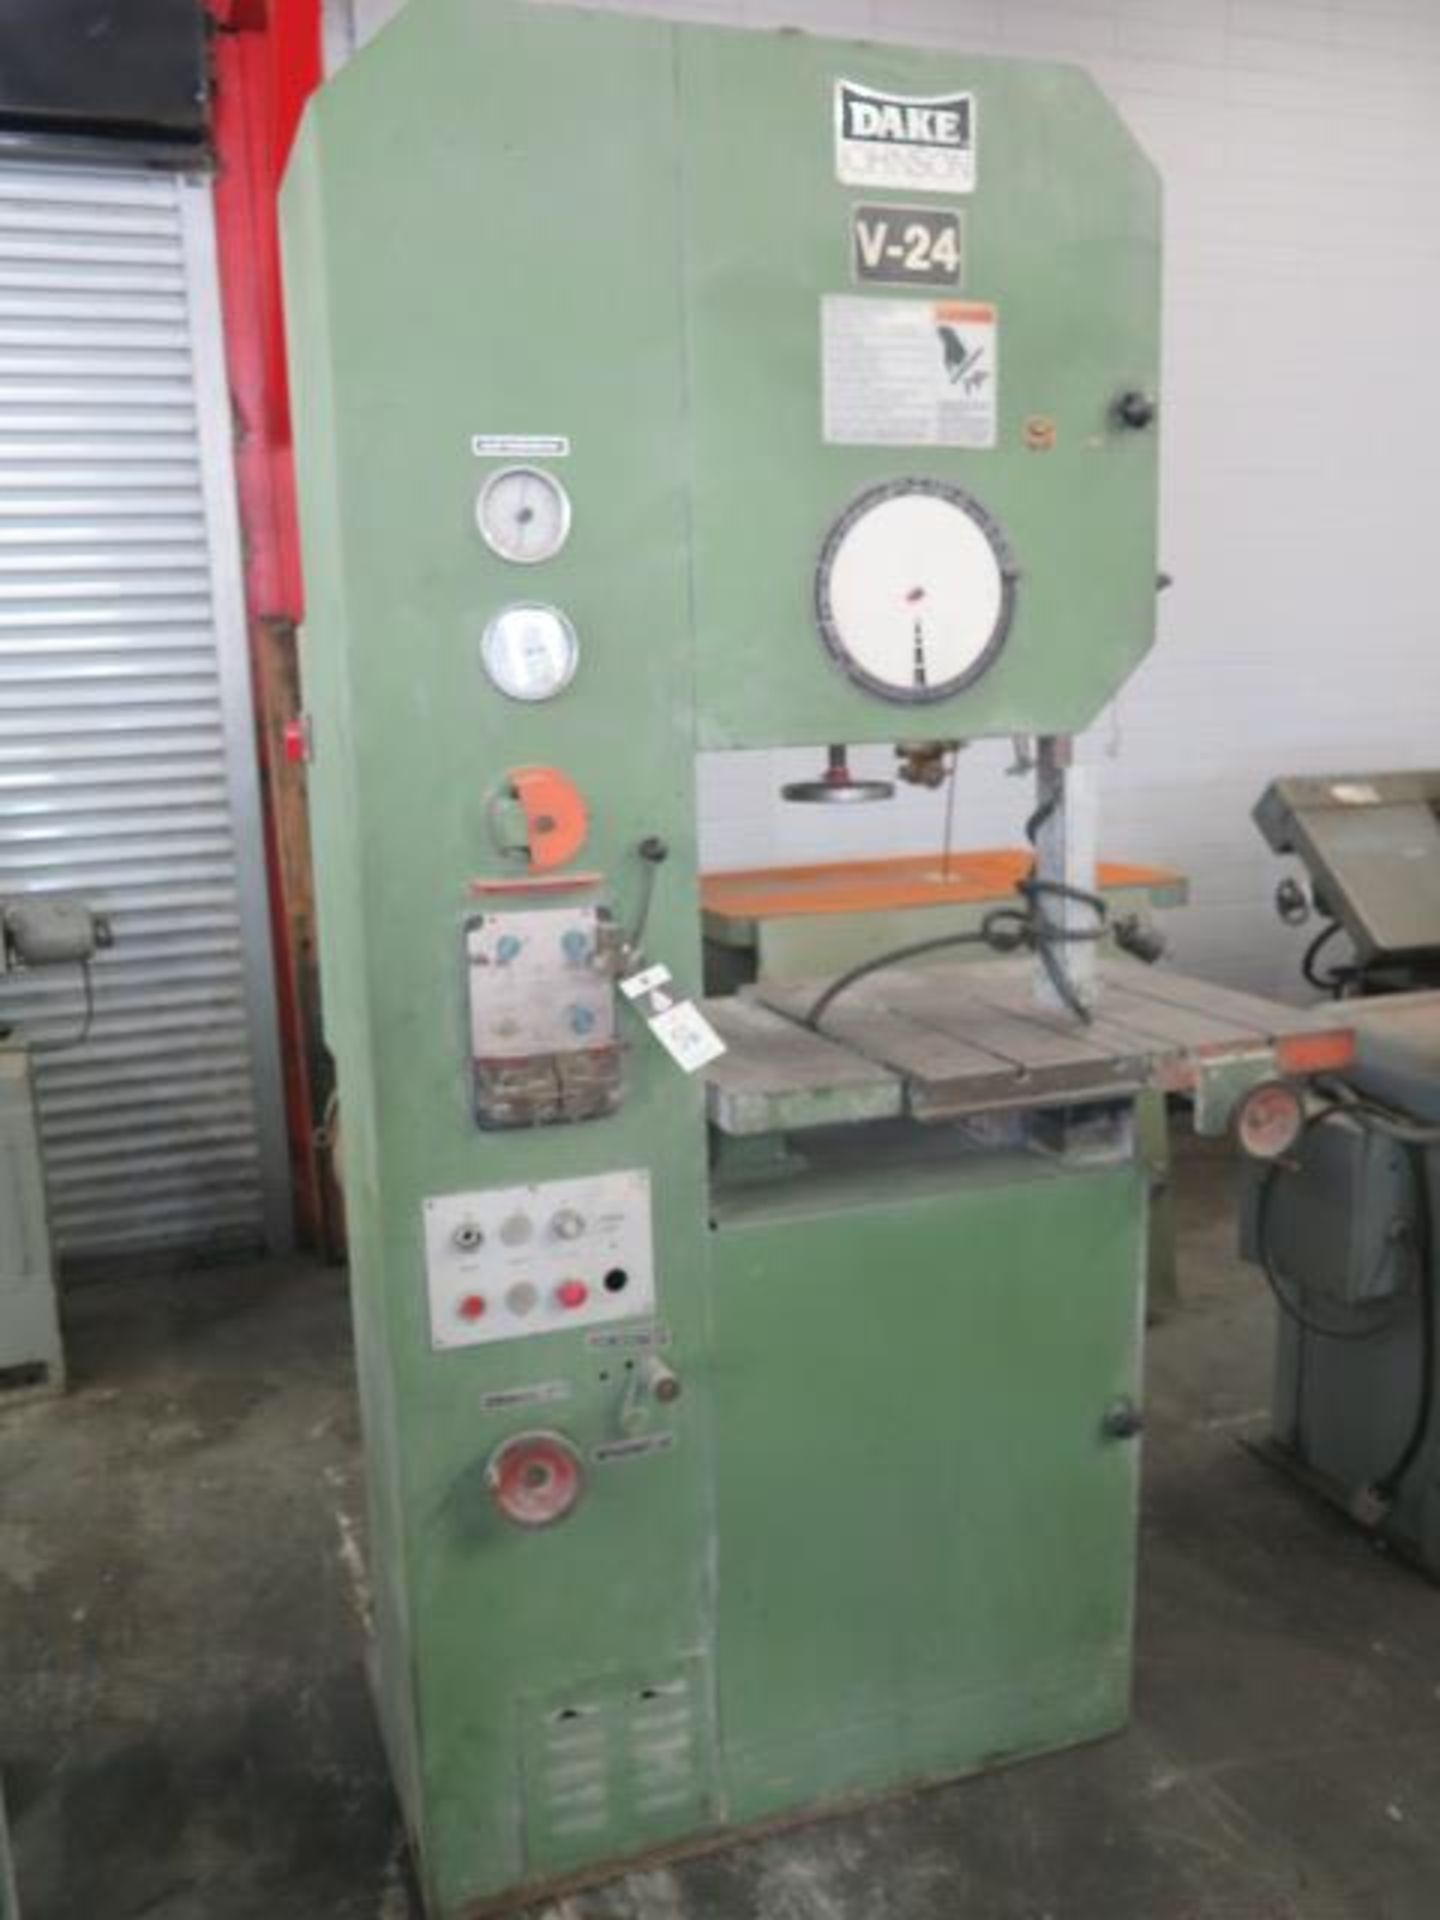 Dake-Johnson mdl. V-24 24” Vertical Band Saw w/ Blade Welder, 26” x 26” Table (SOLD AS-IS - NO